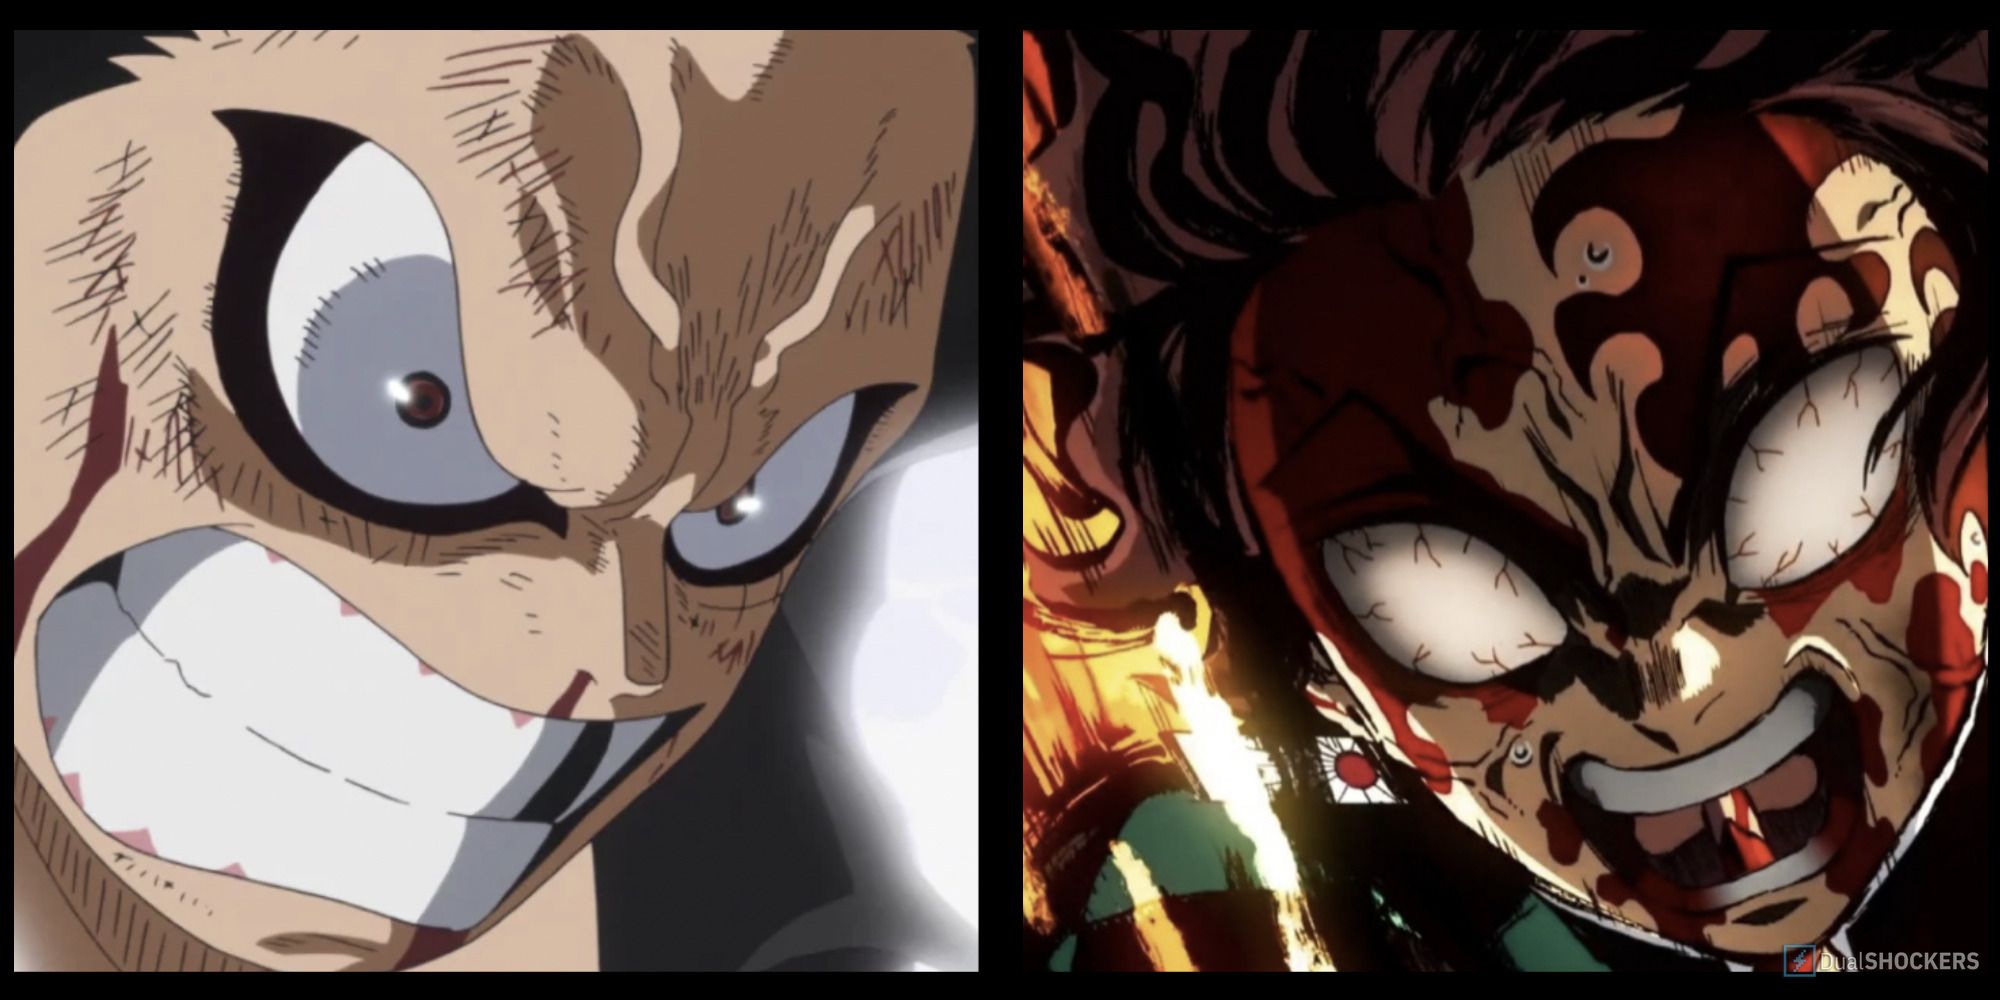 10 Most Visually Impressive Anime Fights Of All Time, According To